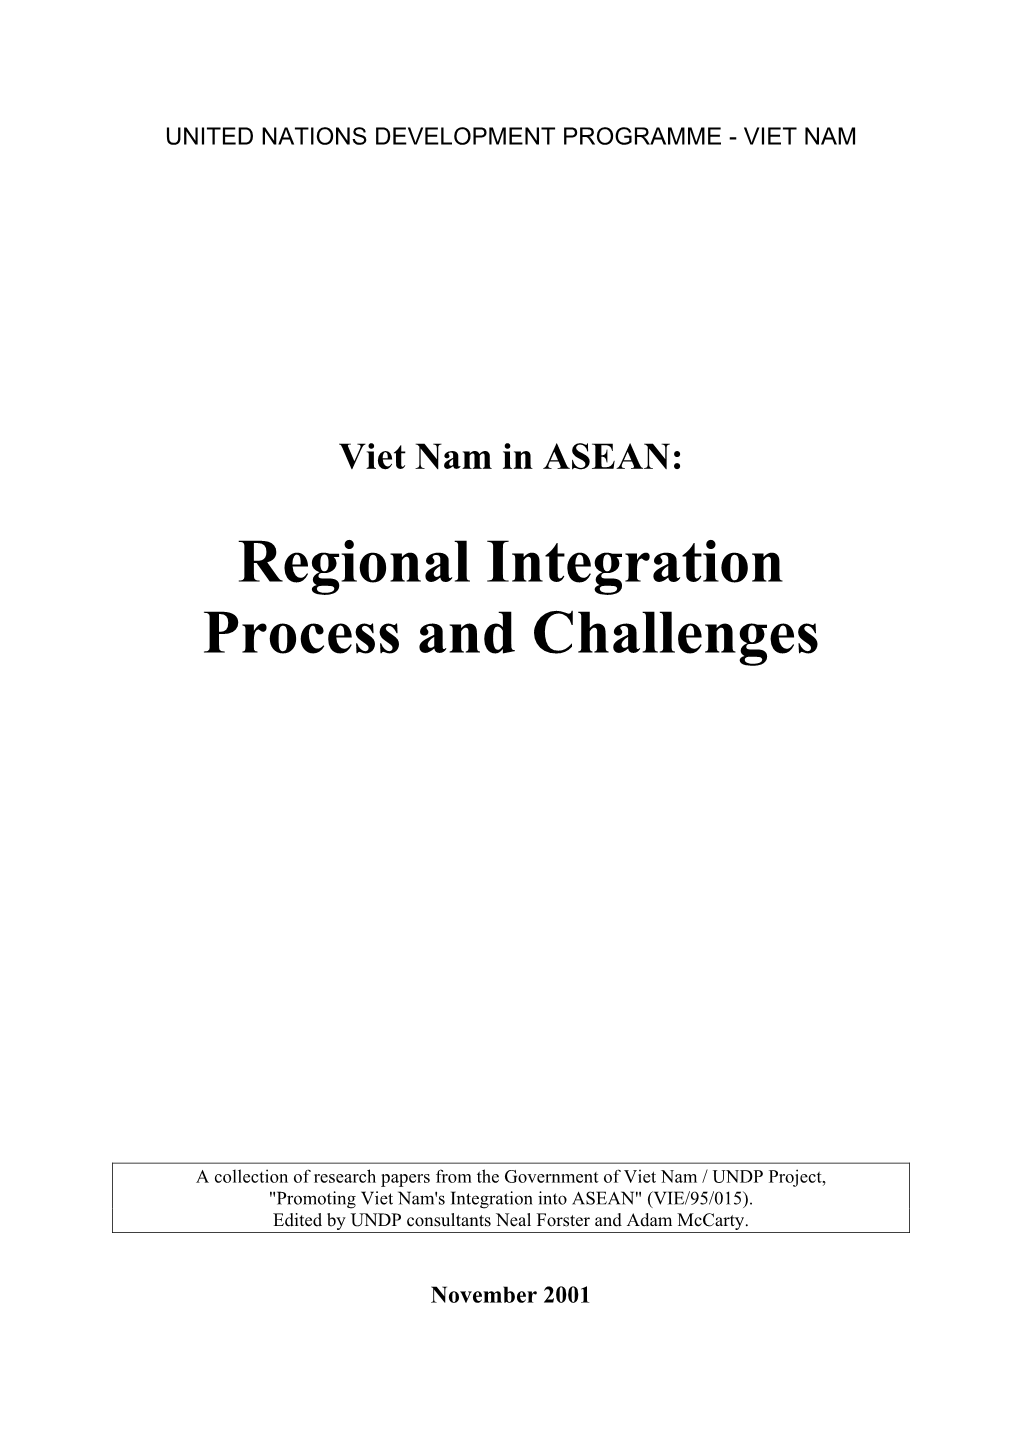 Regional Integration Process and Challenges